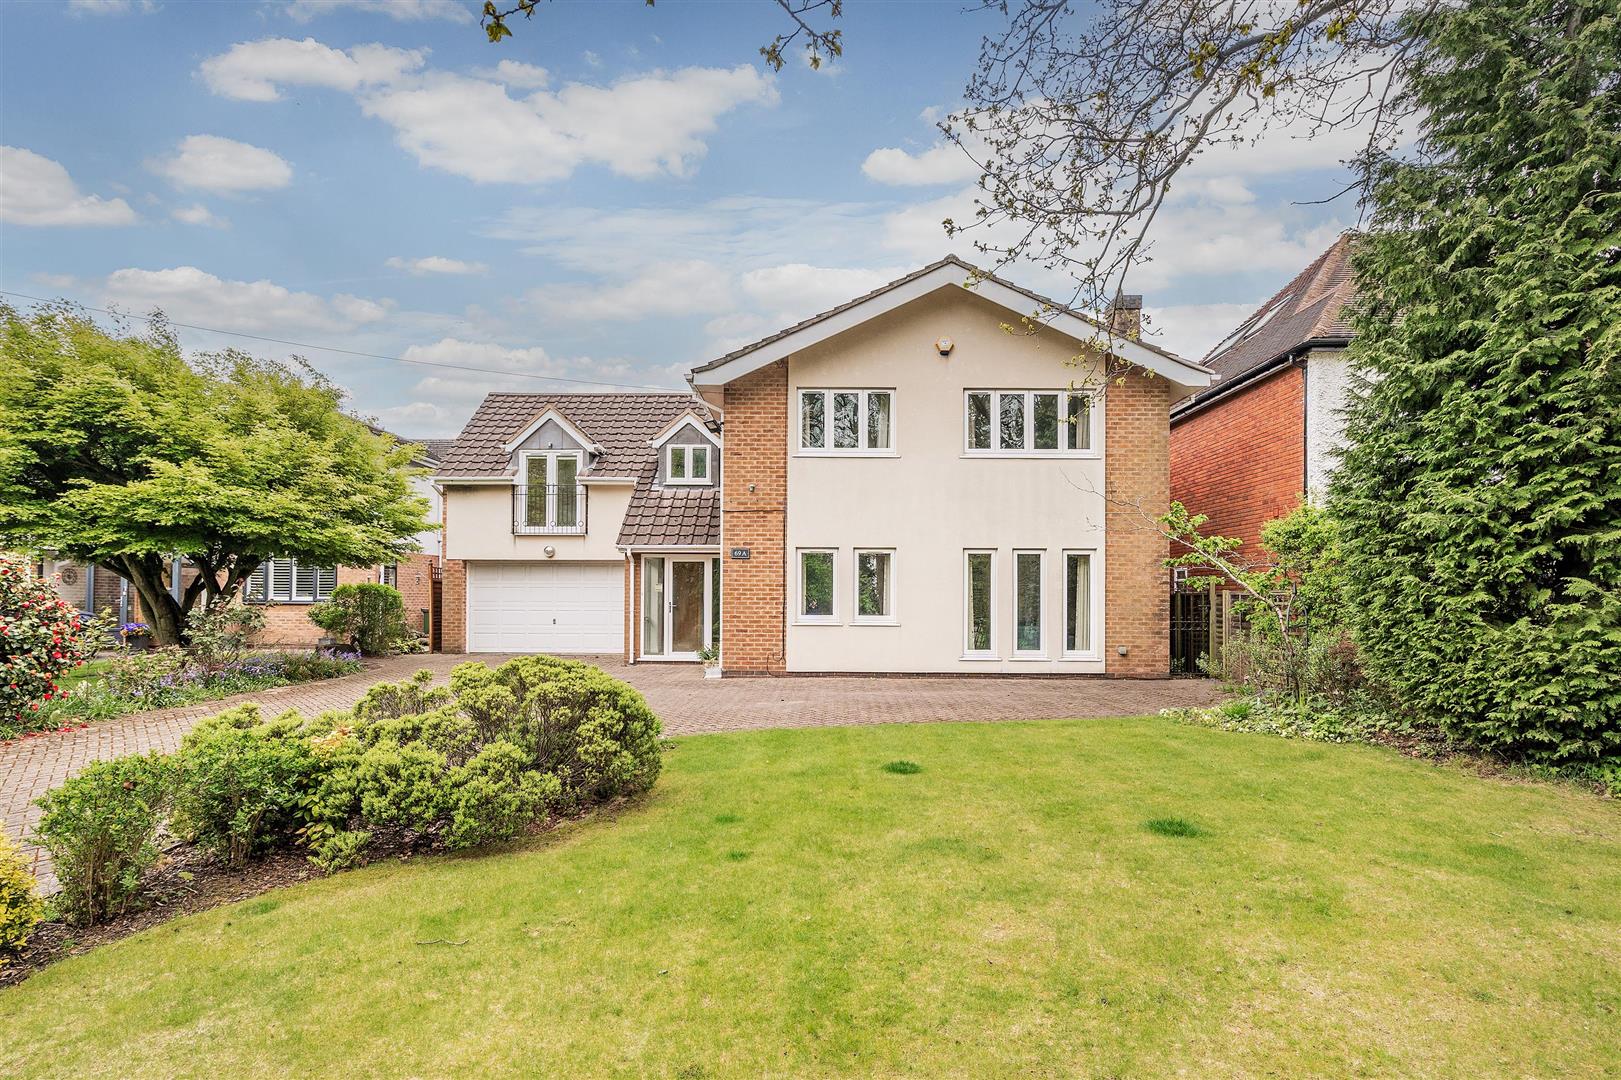 6 bed detached house for sale in Hampton Lane, Solihull  - Property Image 1